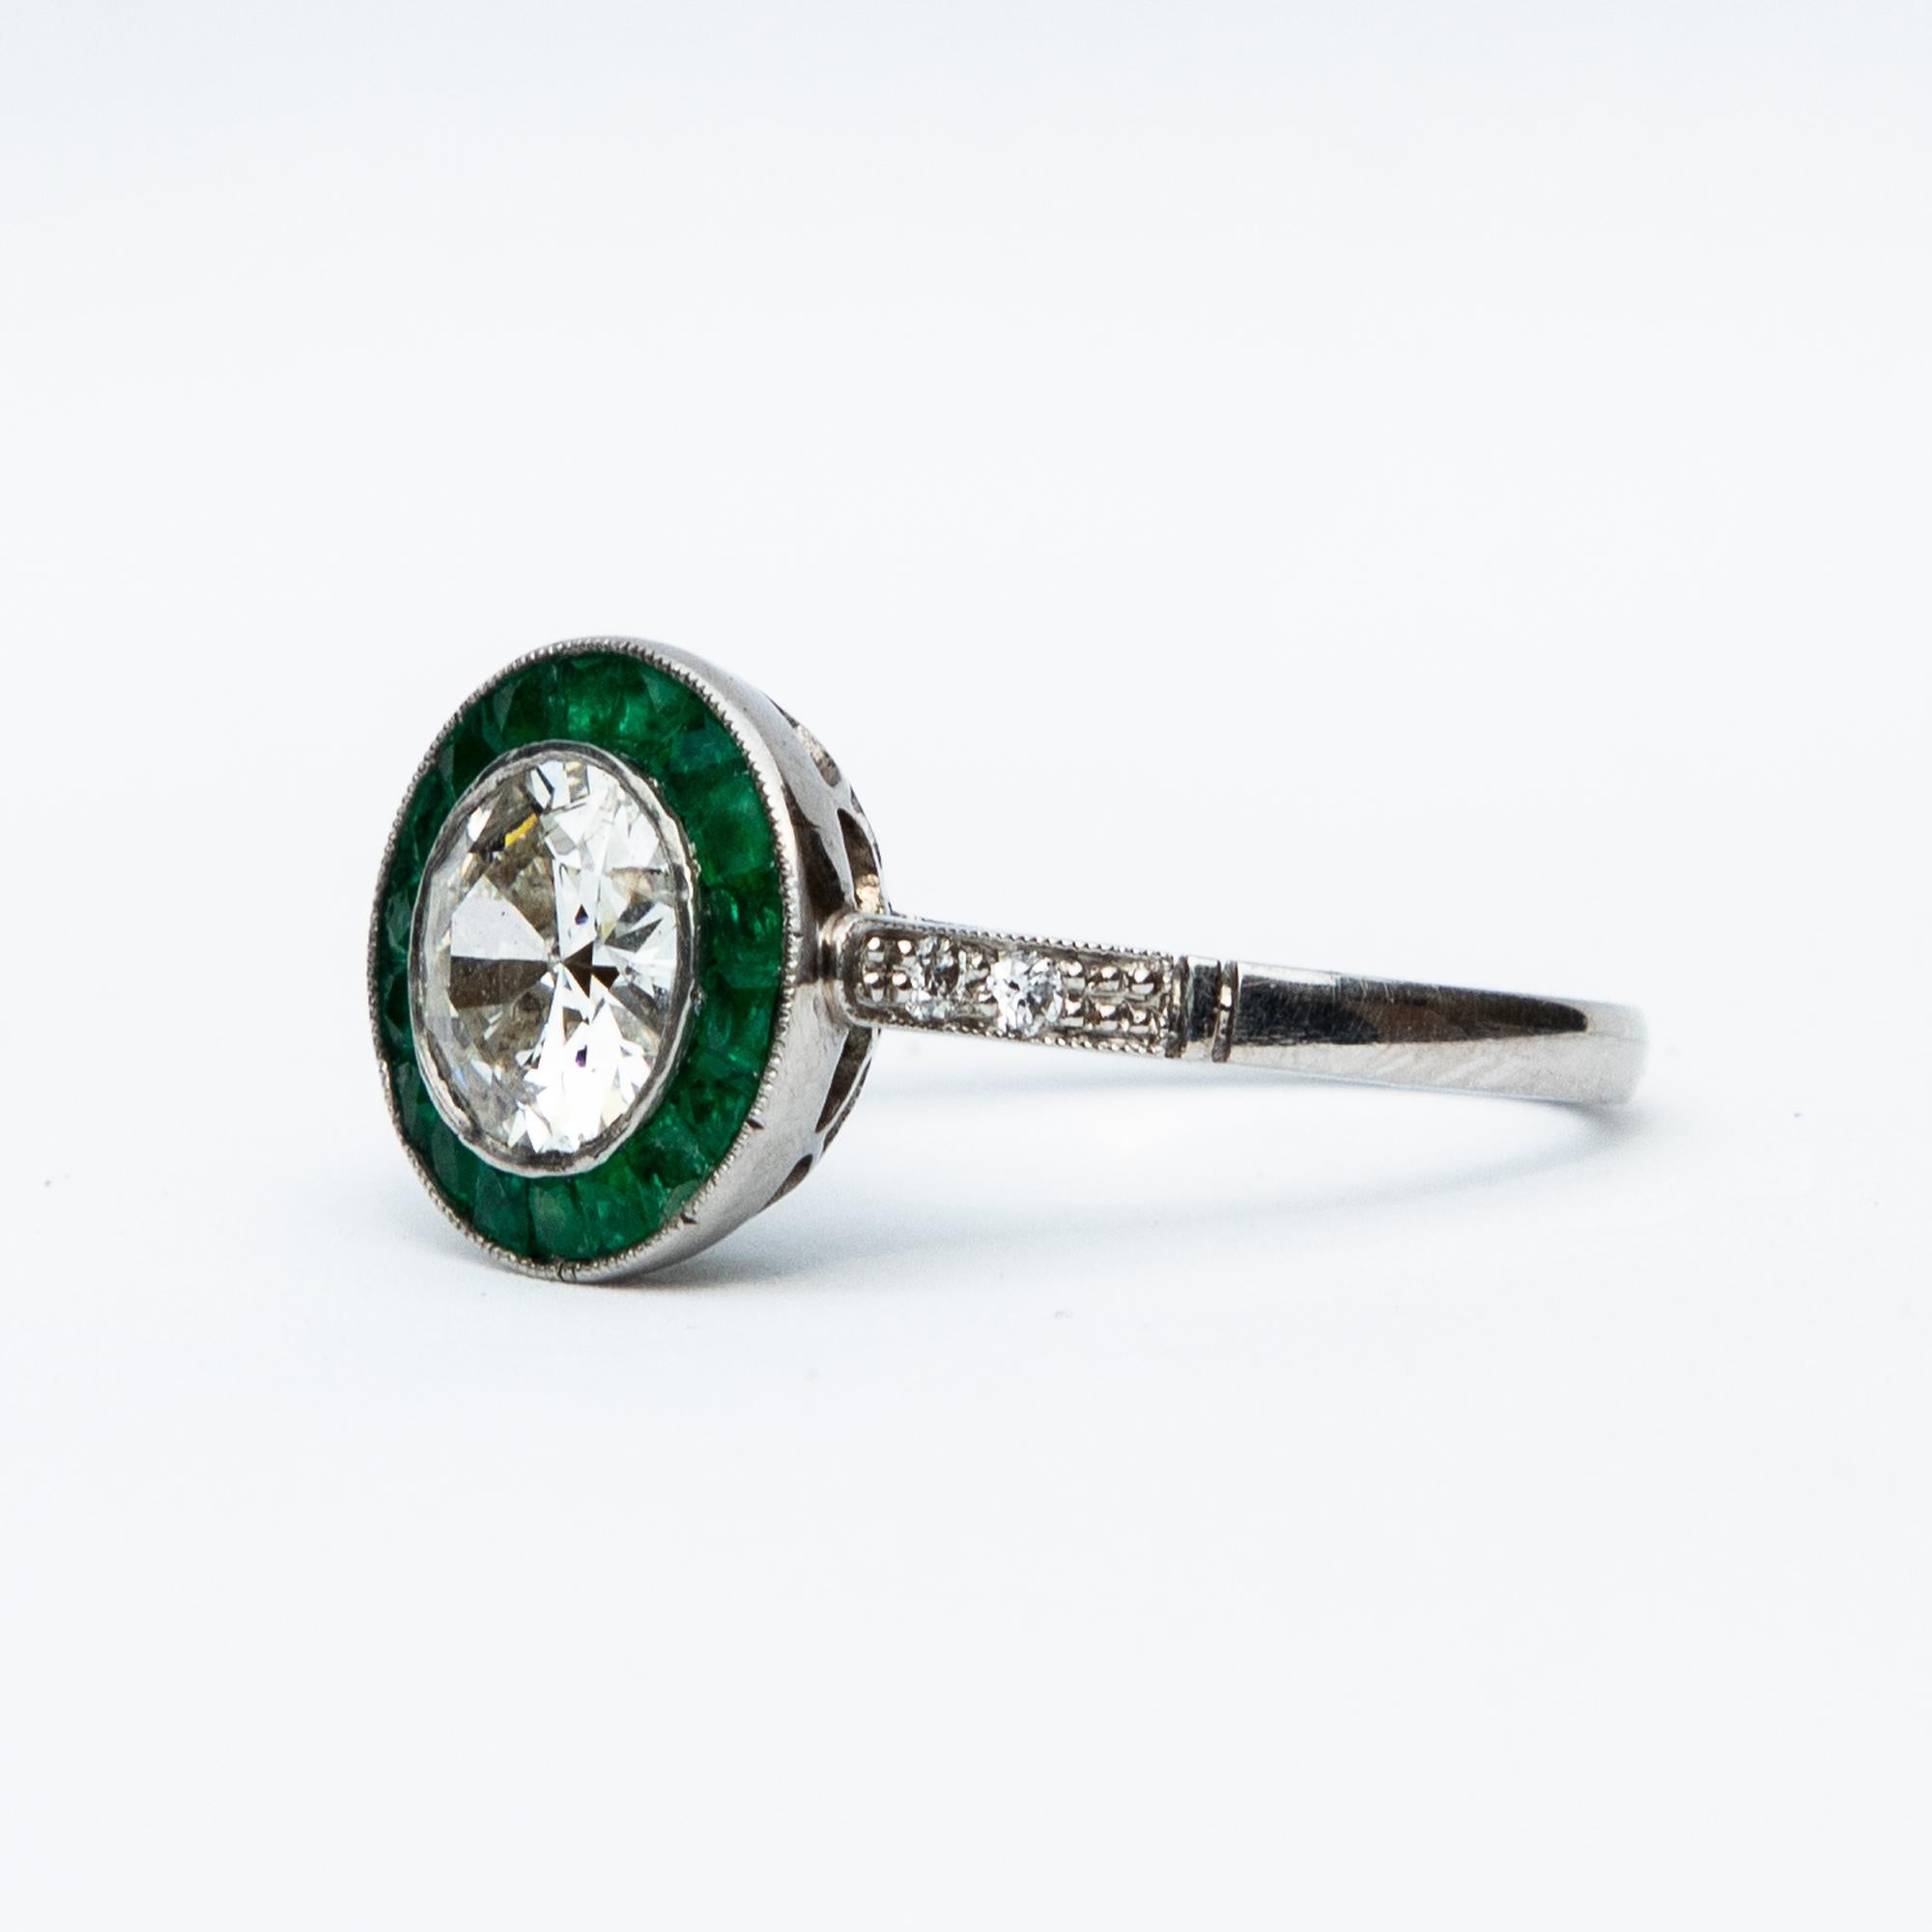 A beautiful example of a platinum emerald and diamond target ring. The central diamond measures 1 carat 30 and is surrounded by emeralds with diamond shoulders to the shank. Total diamond weight certified 1.75 carat, colour I and clarity